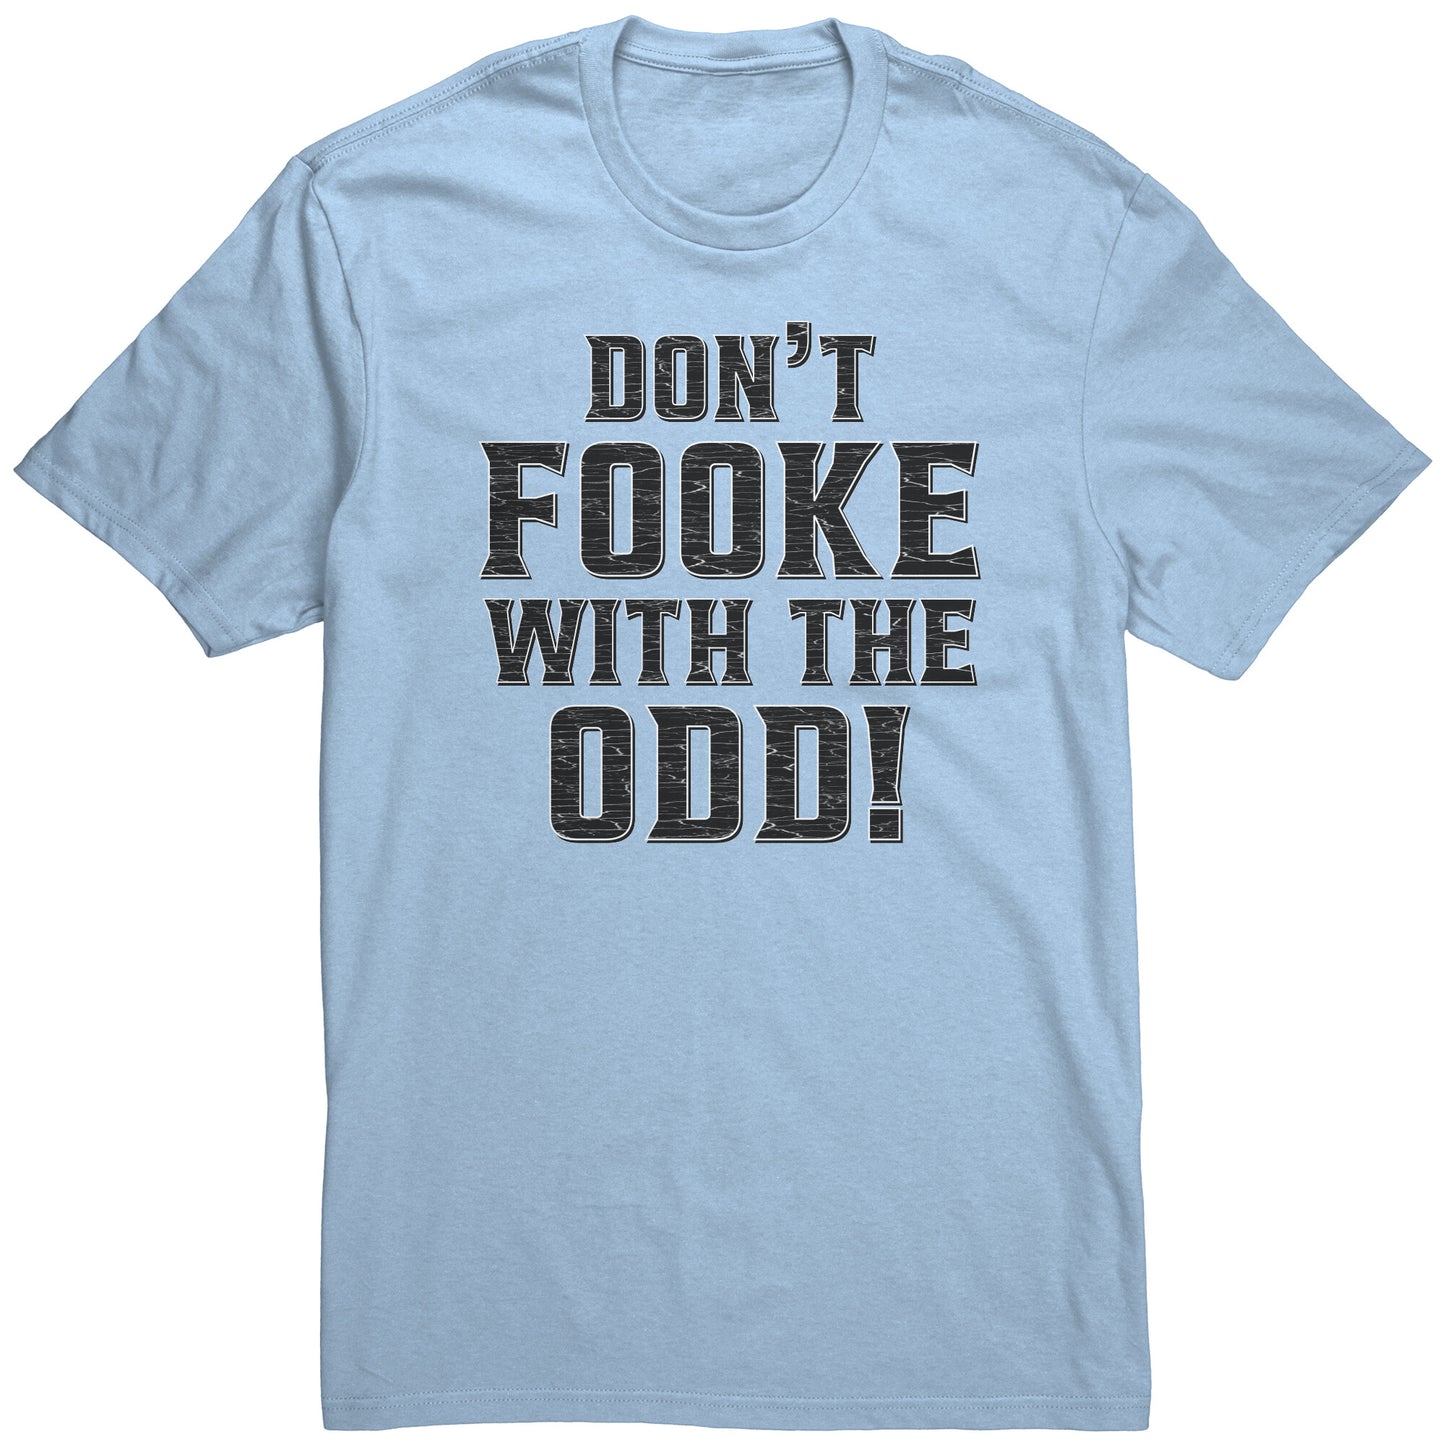 Don't Fooke With The Odd! Men's Light-Colored Tee